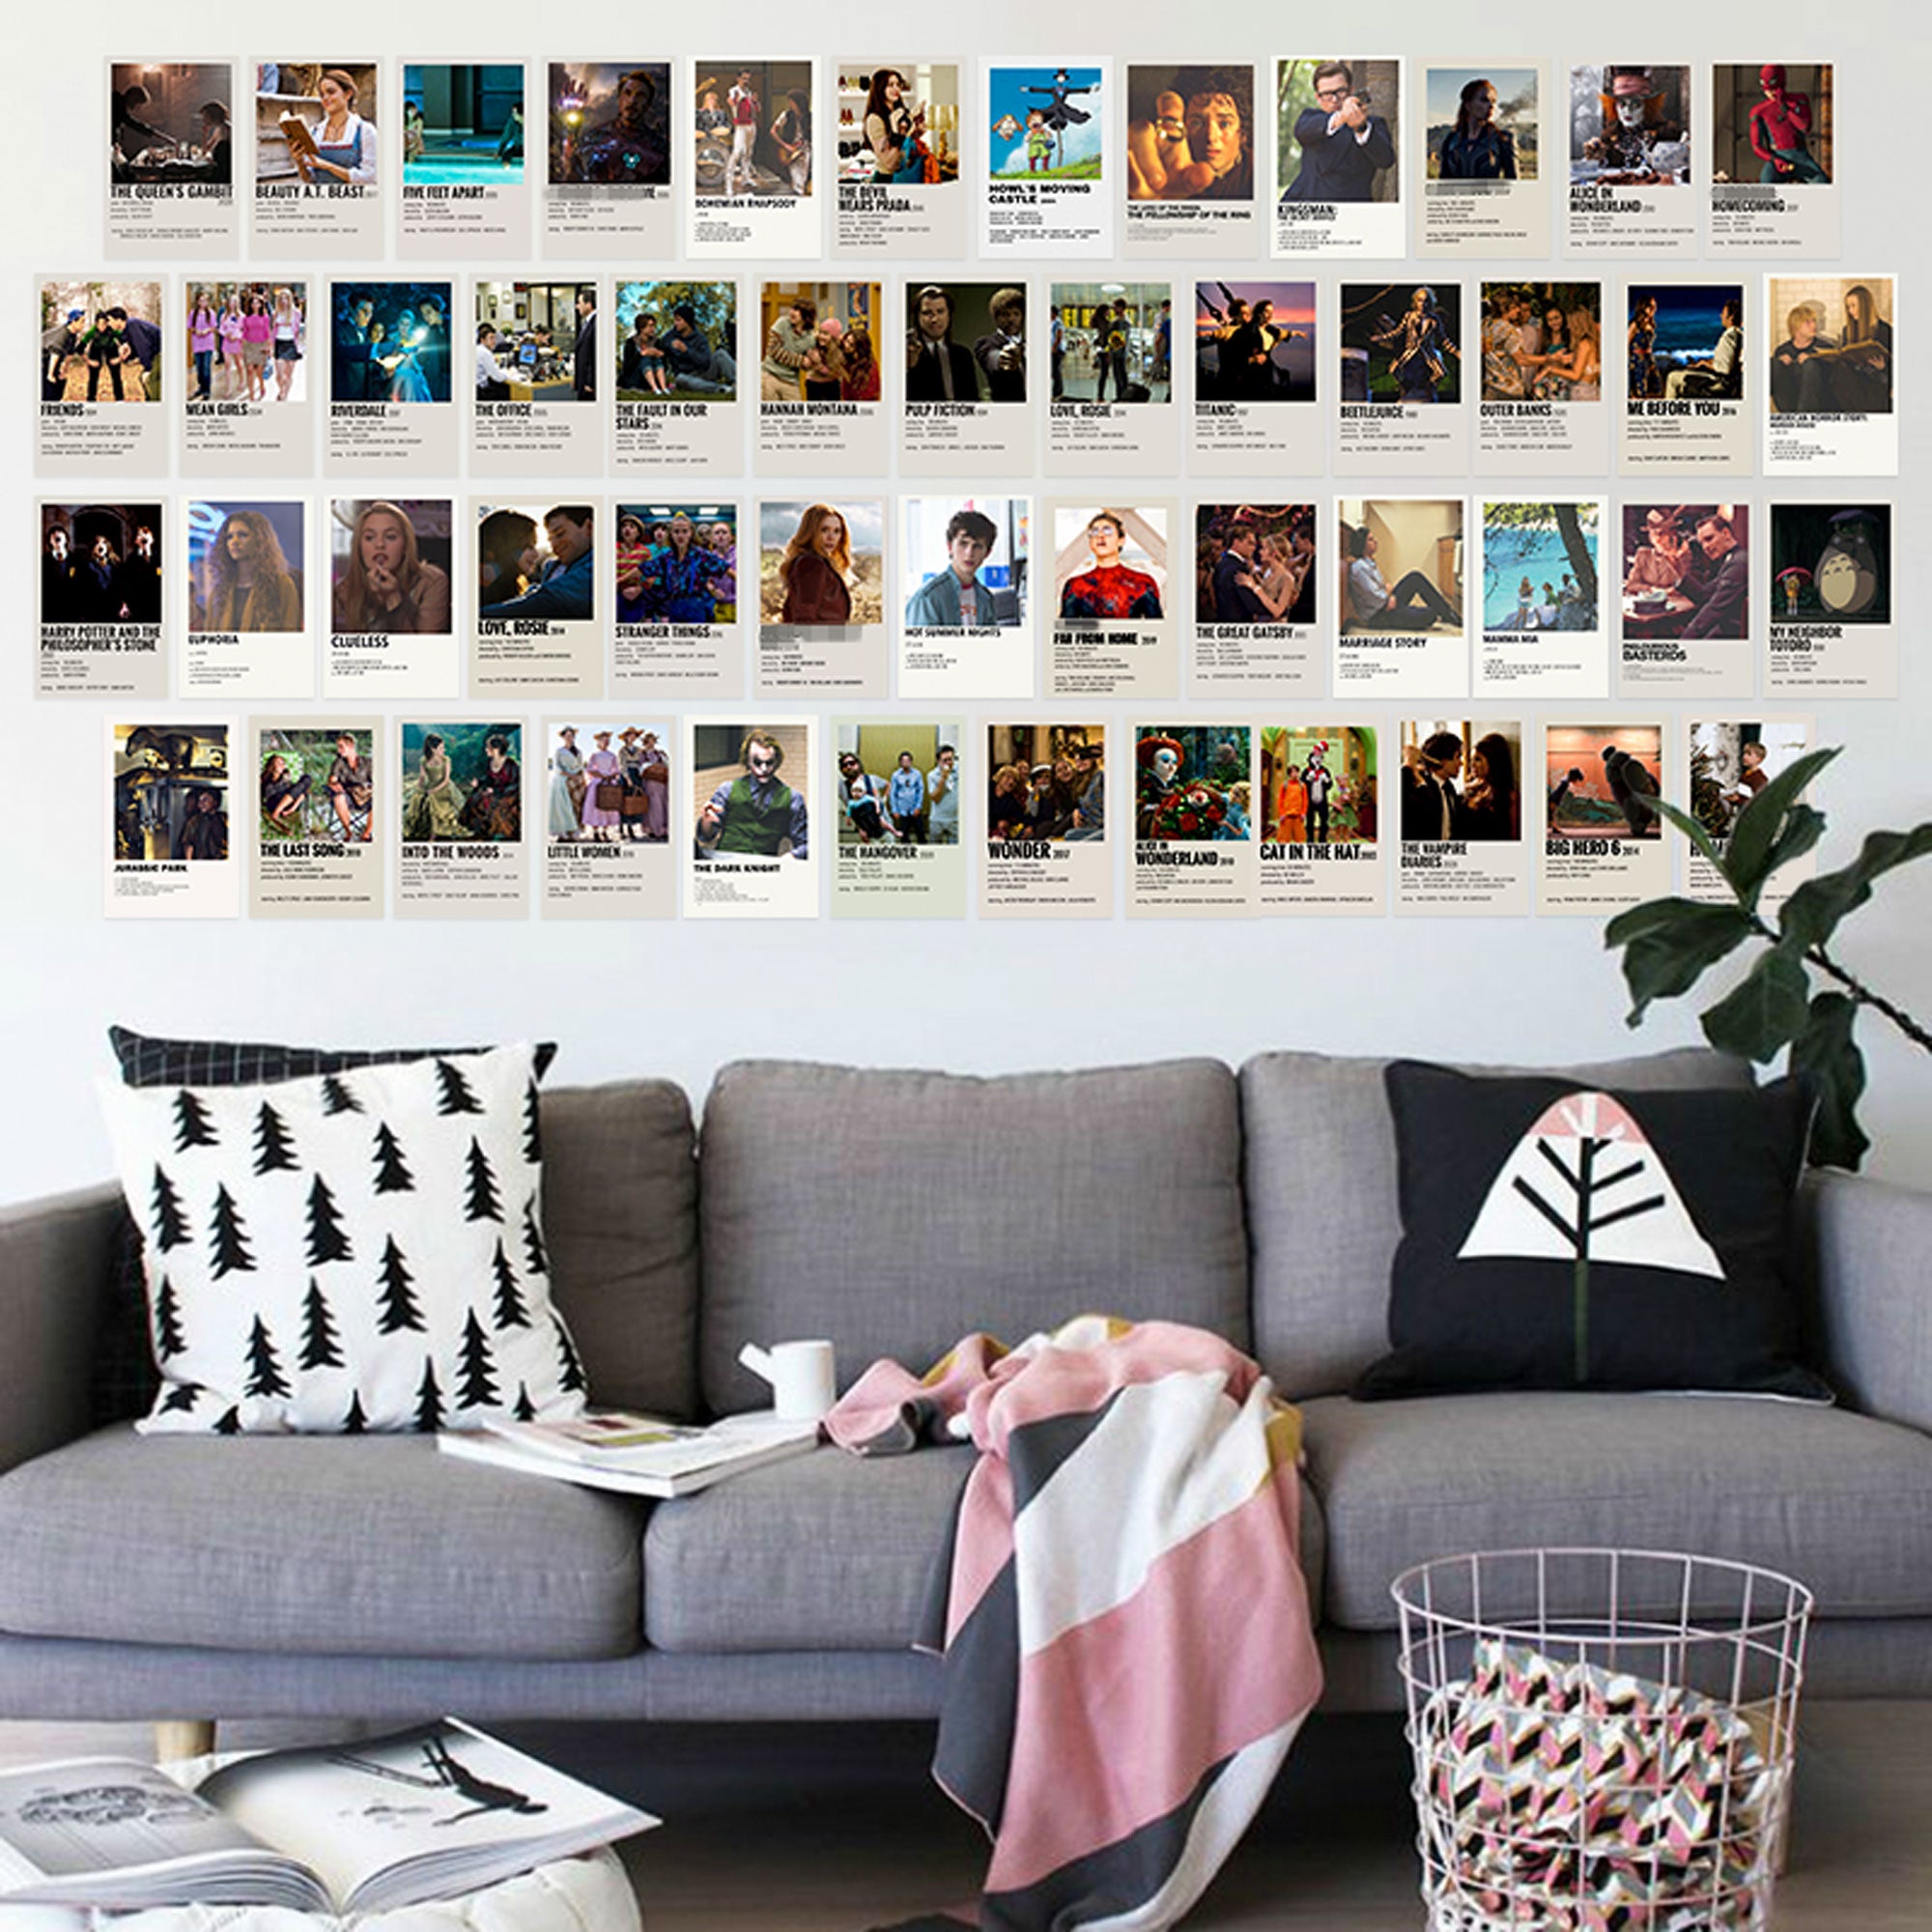 50PCS Movie Poster Aesthetic Pictures Wall Collage Kit, Movie Style Photo Collage Dorm Decor for Teens and Young Adults